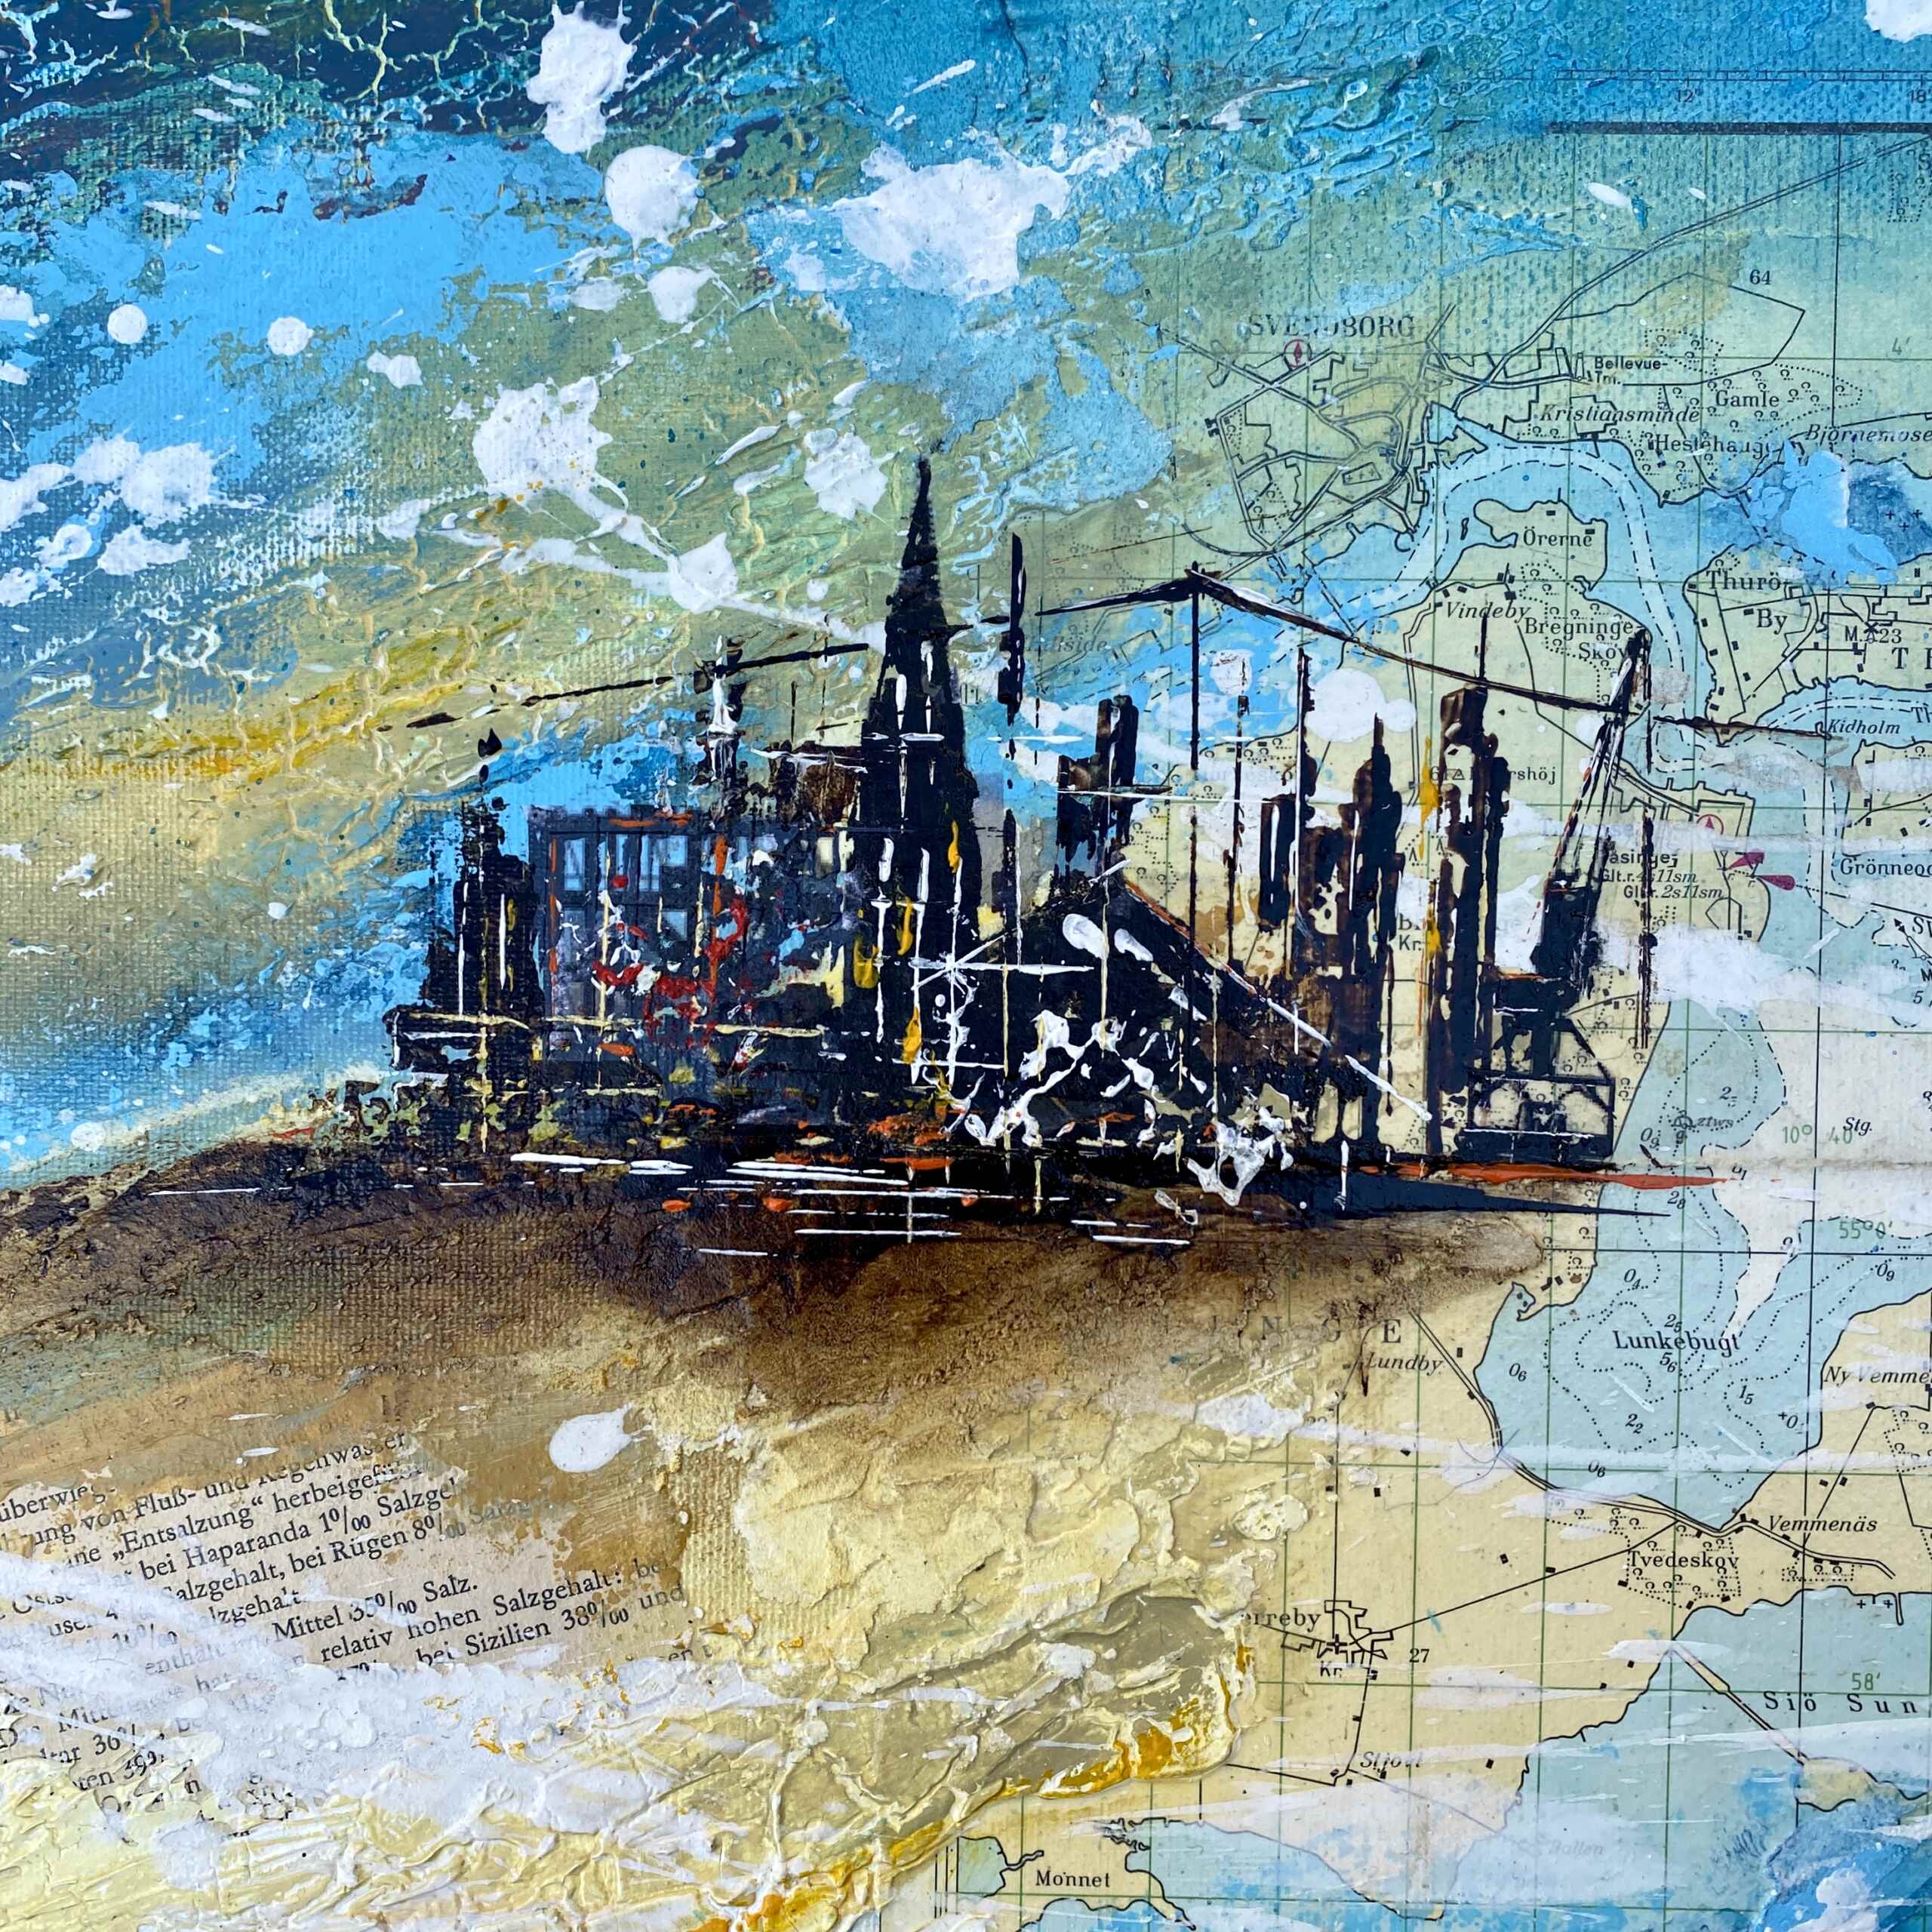 Detail of artwork "Globetrotter on the Great Belt" by Nina Groth